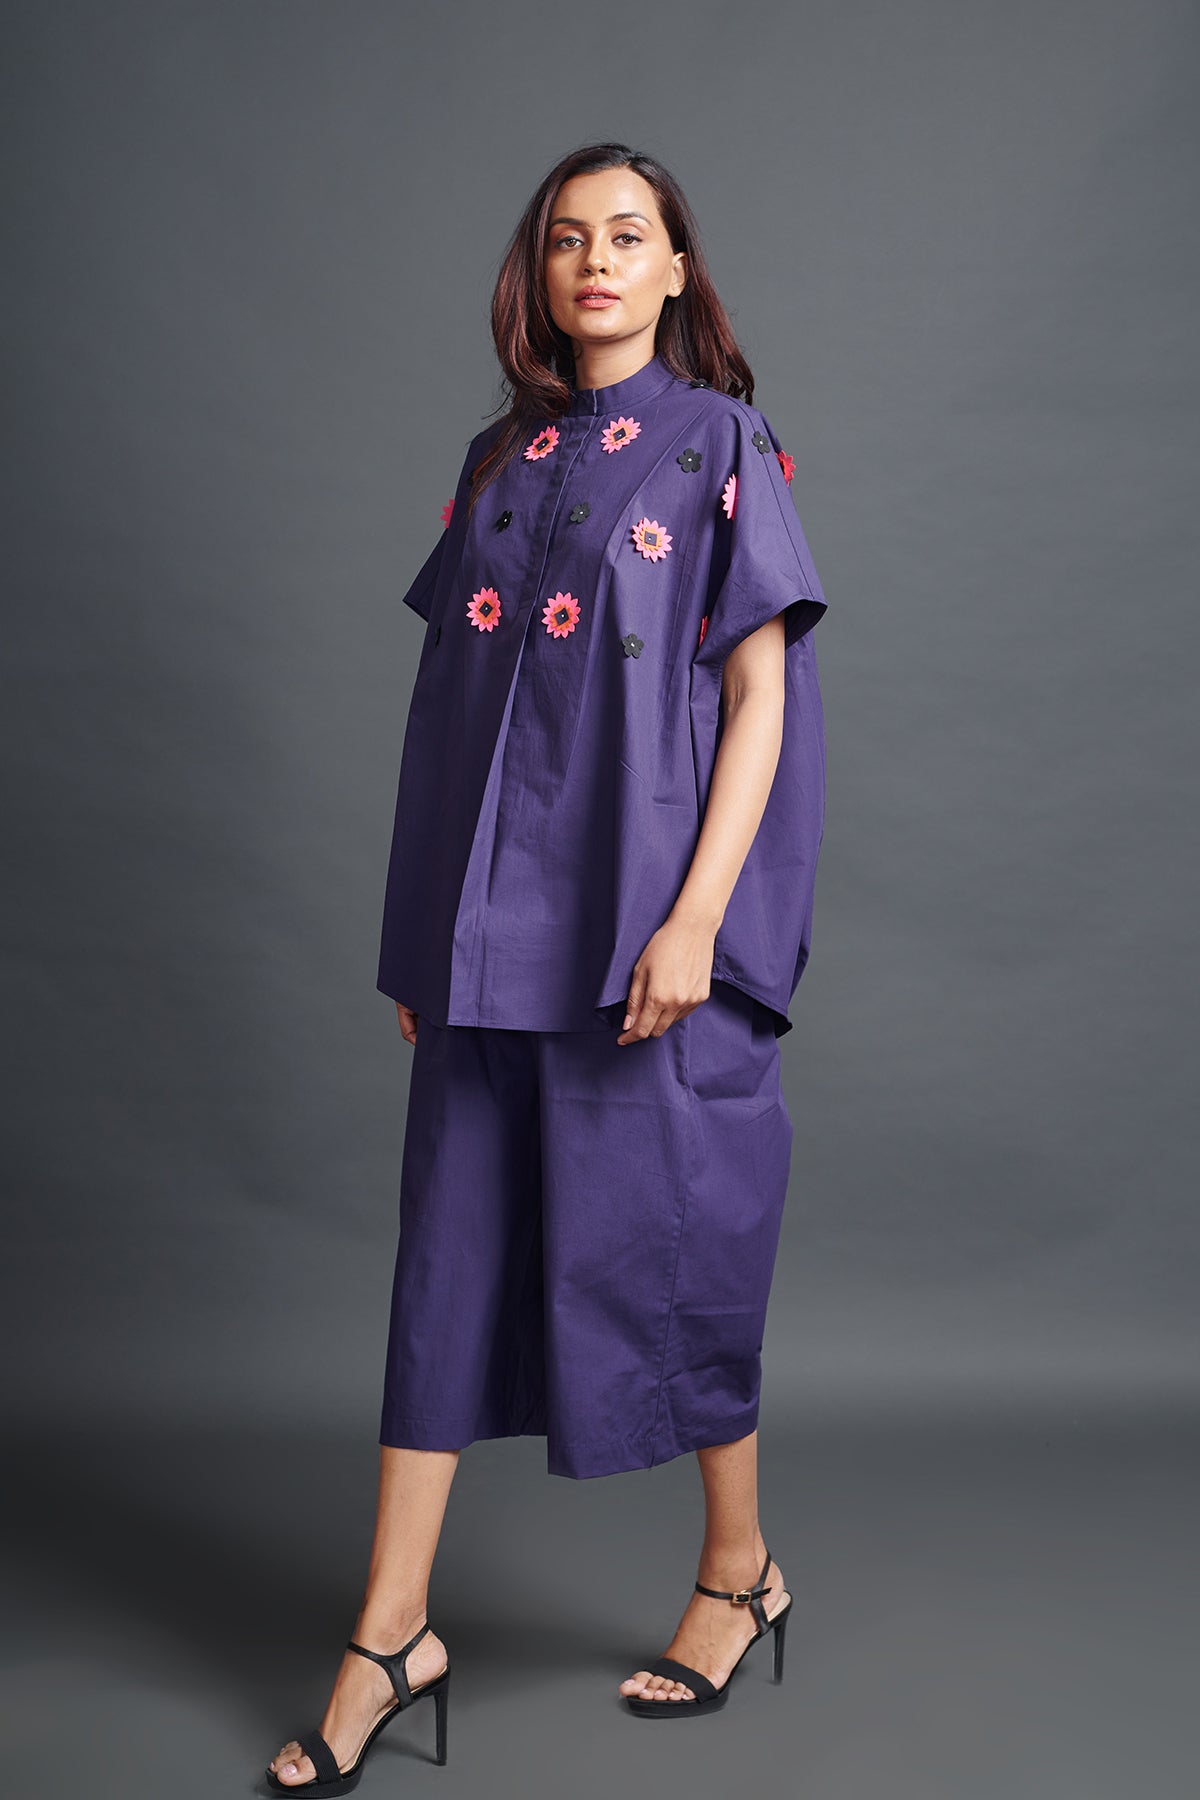 Image of PURPLE OVERSIZED SHIRT IN COTTON BASE WITH CUTWORK EMBROIDERY. IT IS PAIRED WITH MATCHING PANTS. From savoirfashions.com